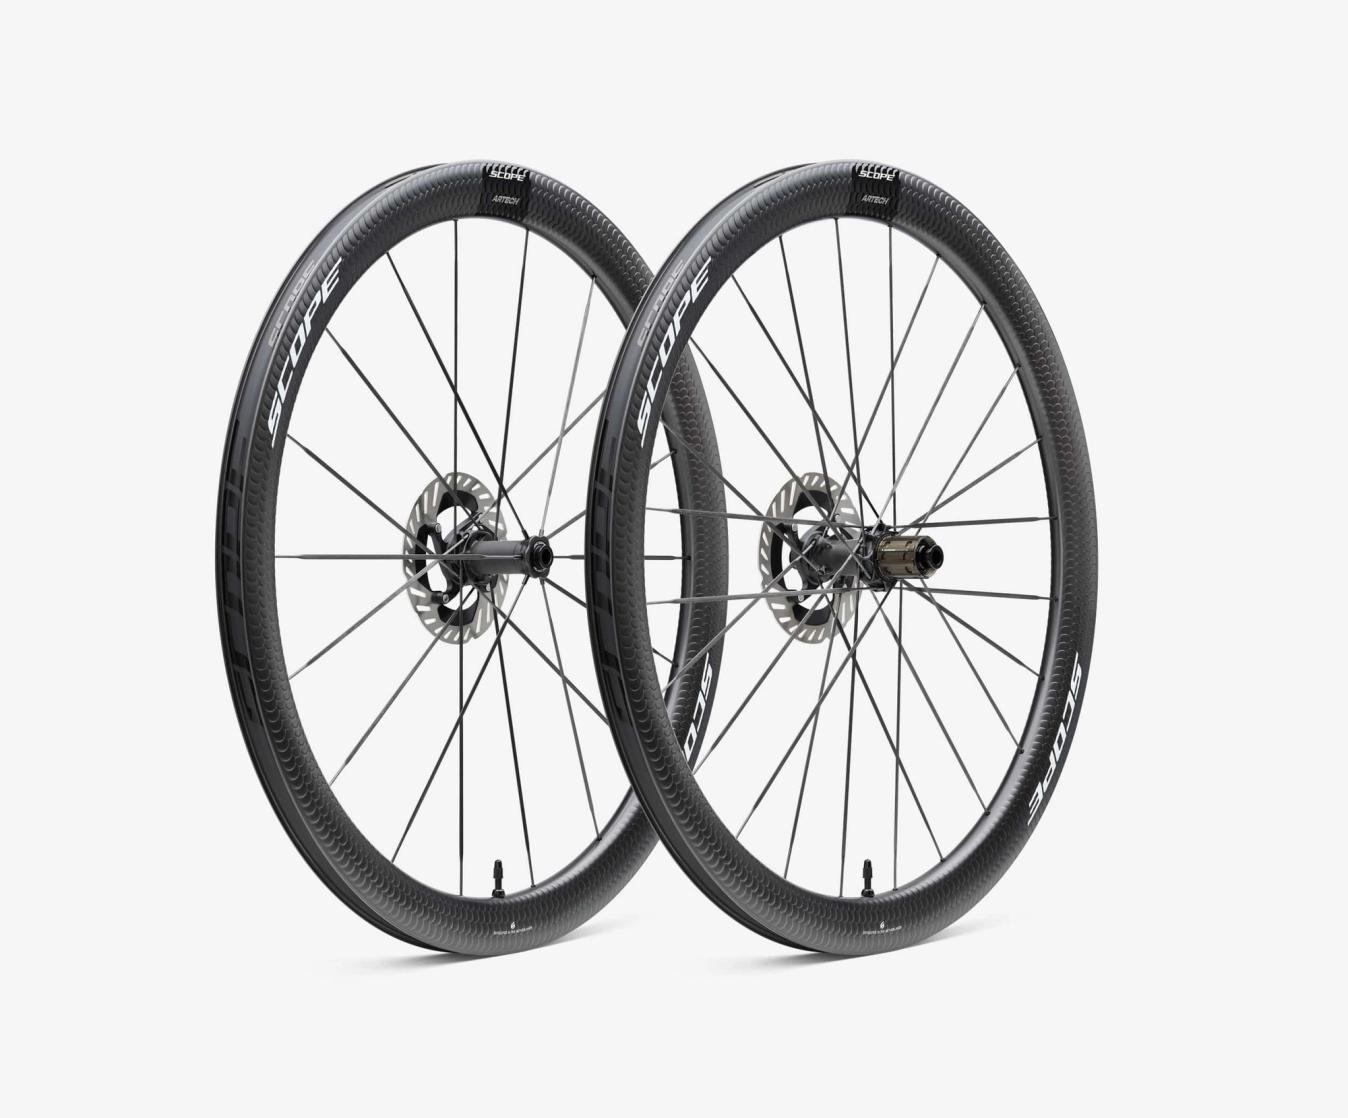 Each wheelset is designed to be lightweight and aerodynamic